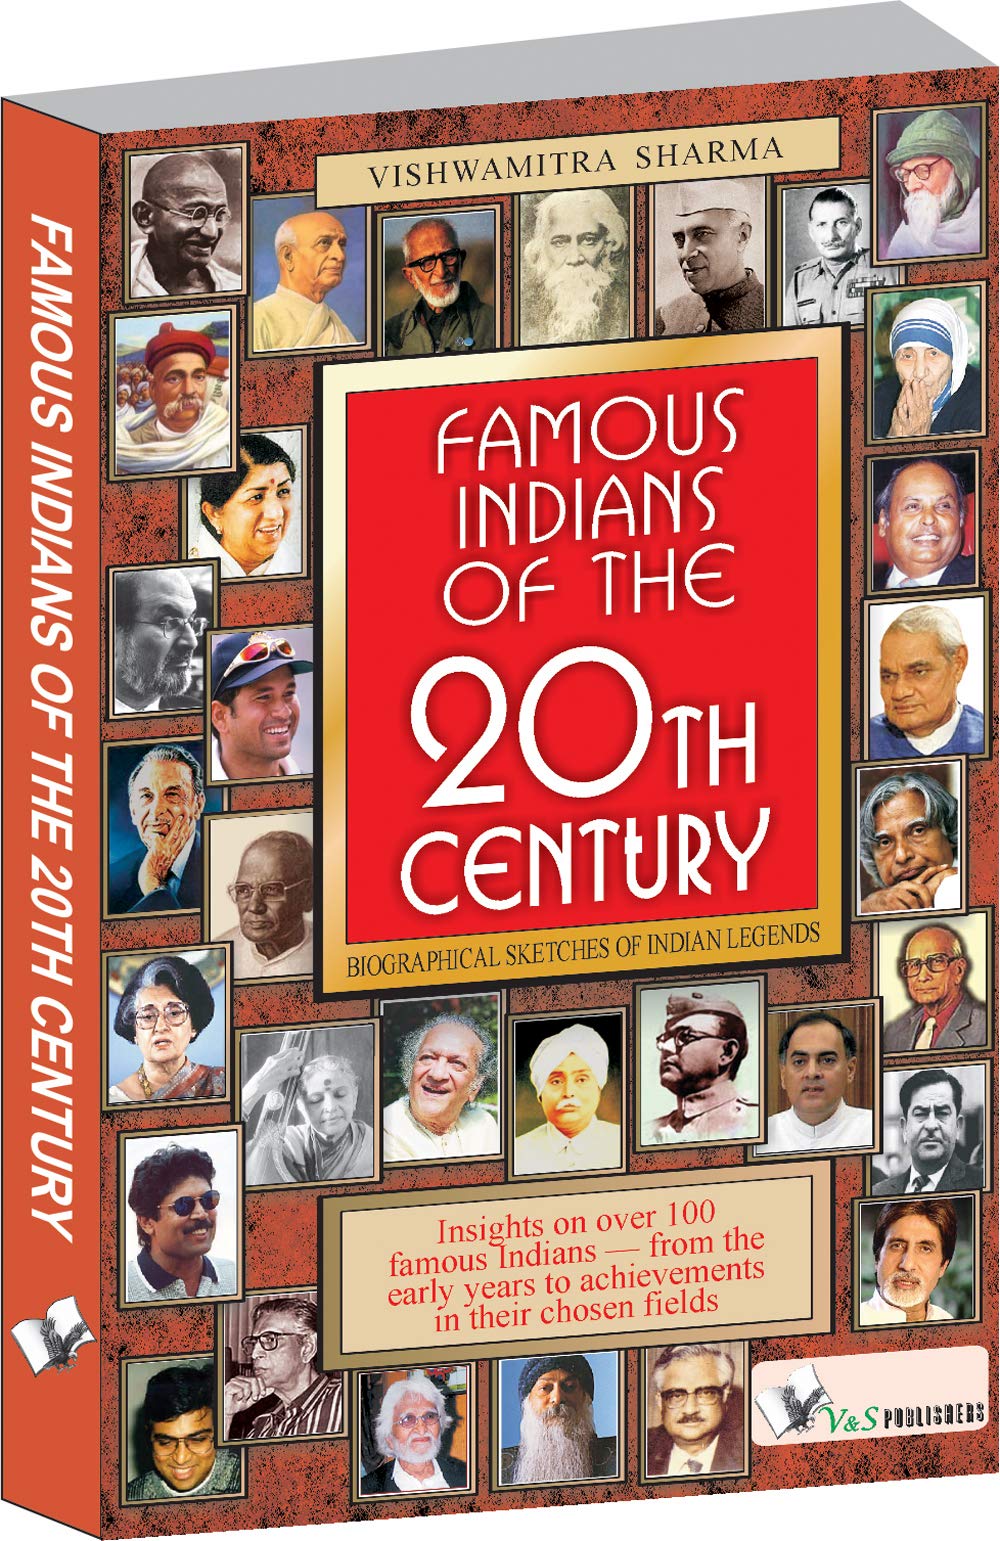 FAMOUS INDIANS OF THE 20TH CENTURY